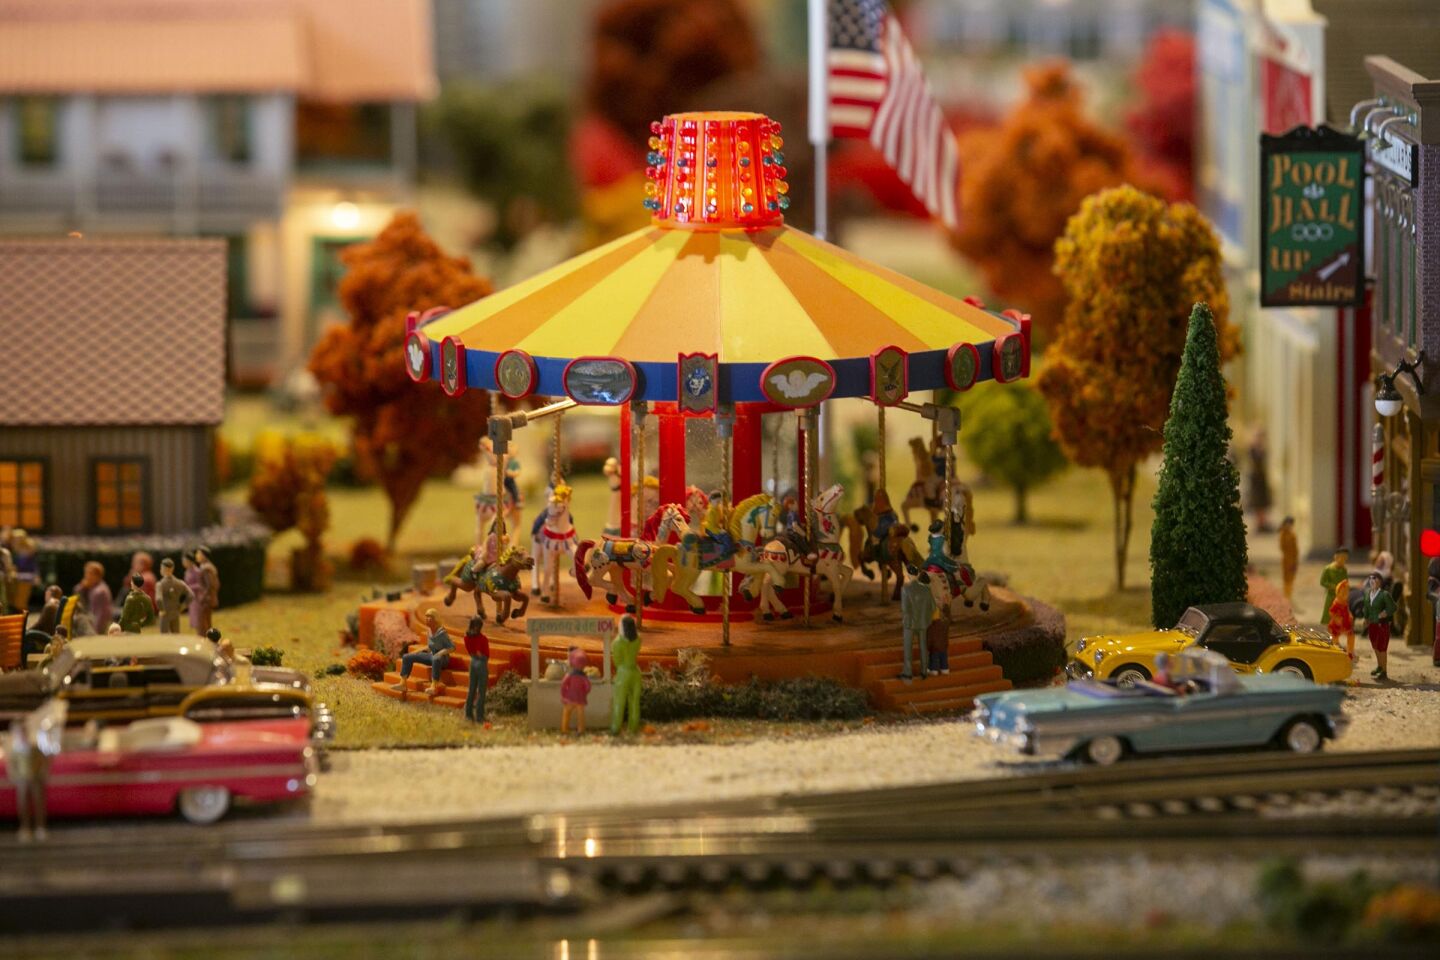 David Lizerbram and his wife Mana Monzavi took over the Old Town Model Railroad Depot, which was in danger of closing. The extensive train layout and its detailed and sometimes humorous dioramas was photographed on Friday, Dec. 13, 2019, at its Old Town, San Diego location. A carousel along the tracks.